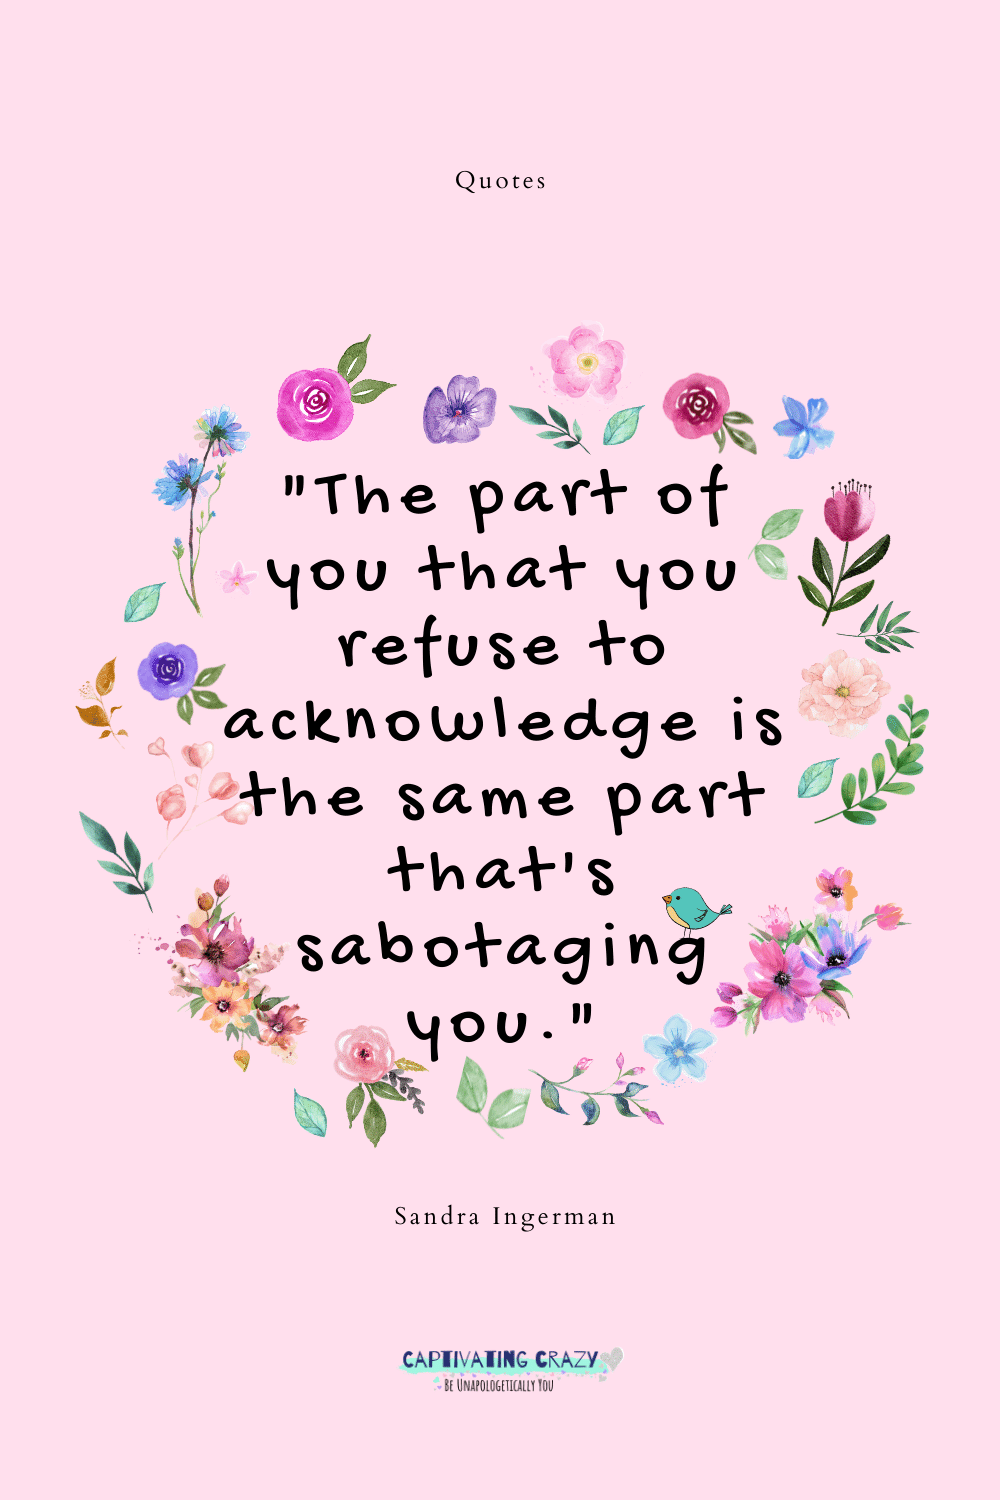 "The part of you that you refuse to acknowledge is the same part that's sabotaging you." -Sandra Ingerman